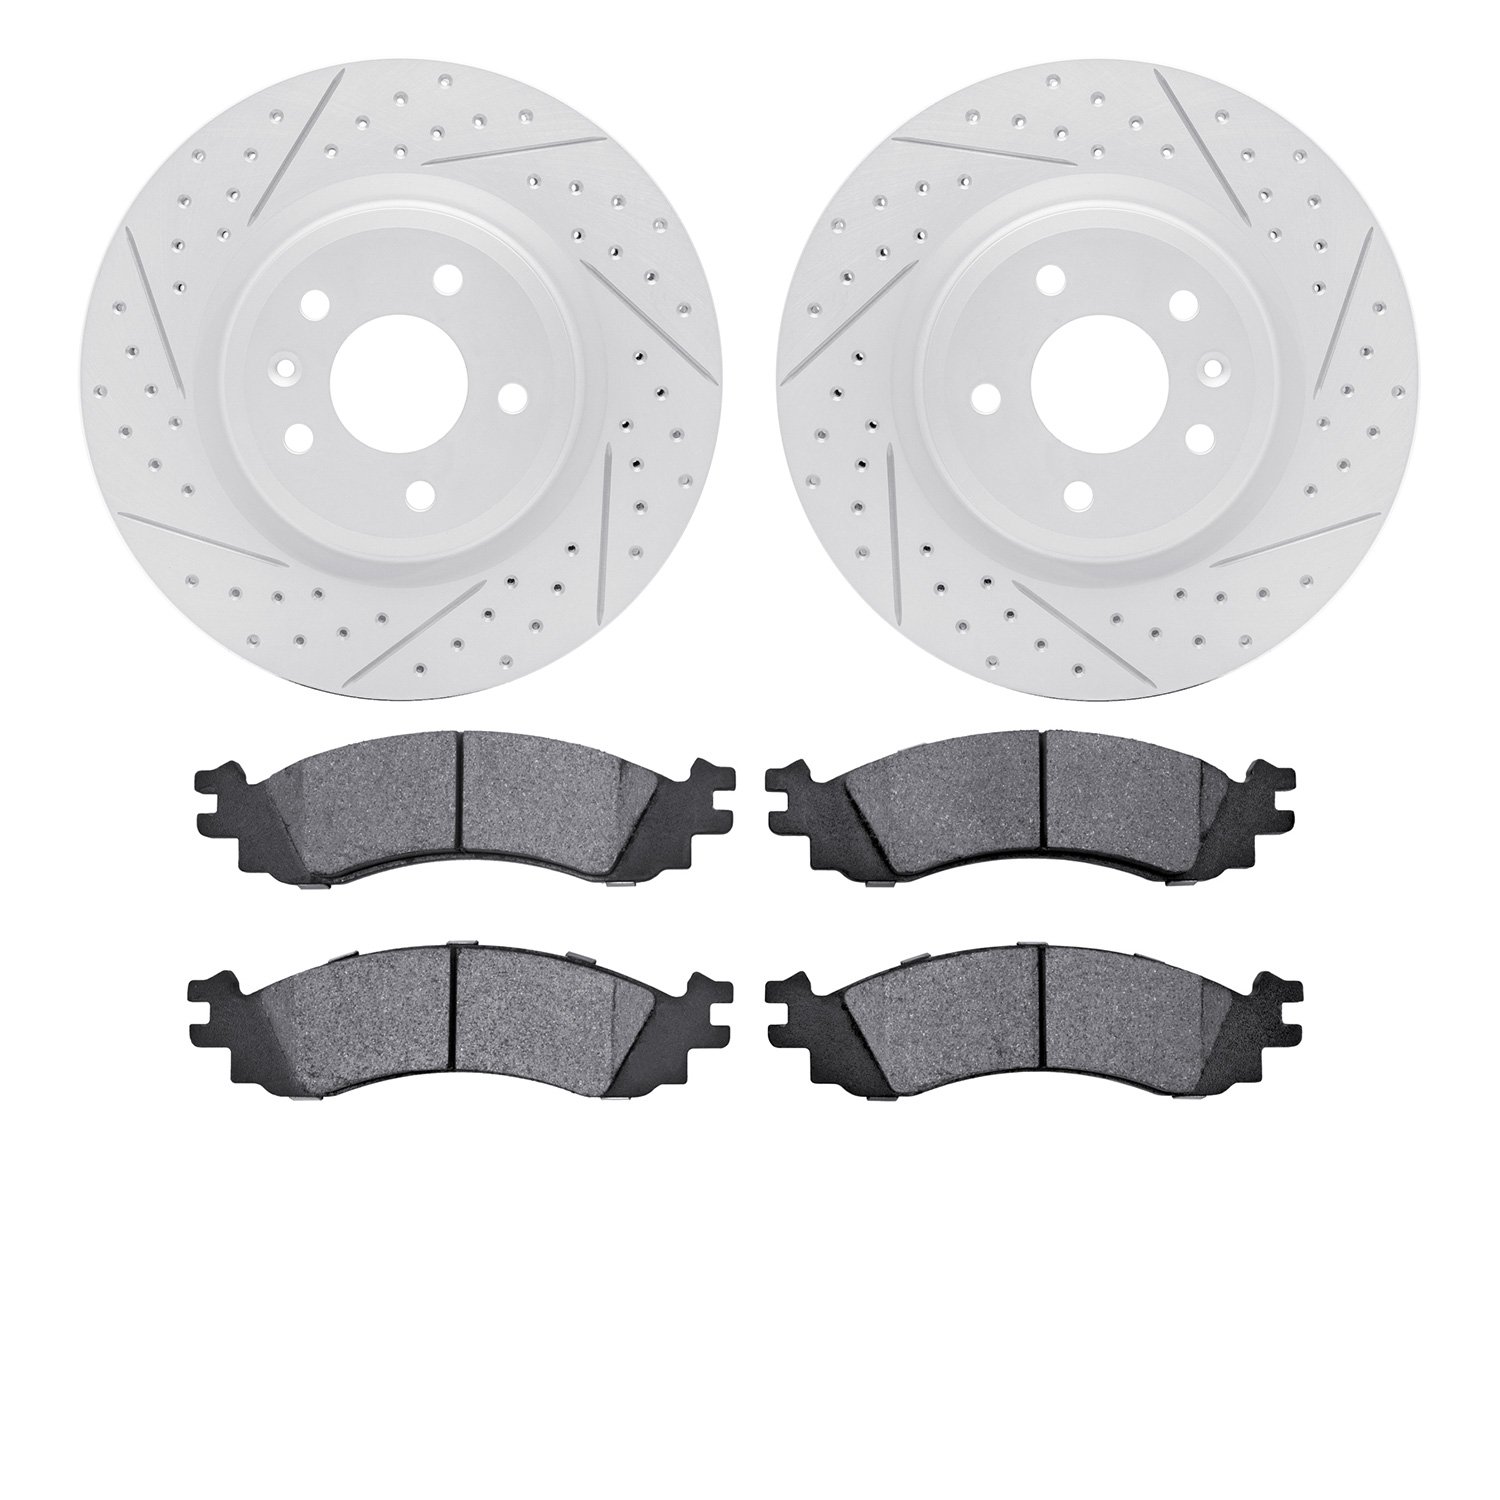 2502-54054 Geoperformance Drilled/Slotted Rotors w/5000 Advanced Brake Pads Kit, 2010-2010 Ford/Lincoln/Mercury/Mazda, Position: